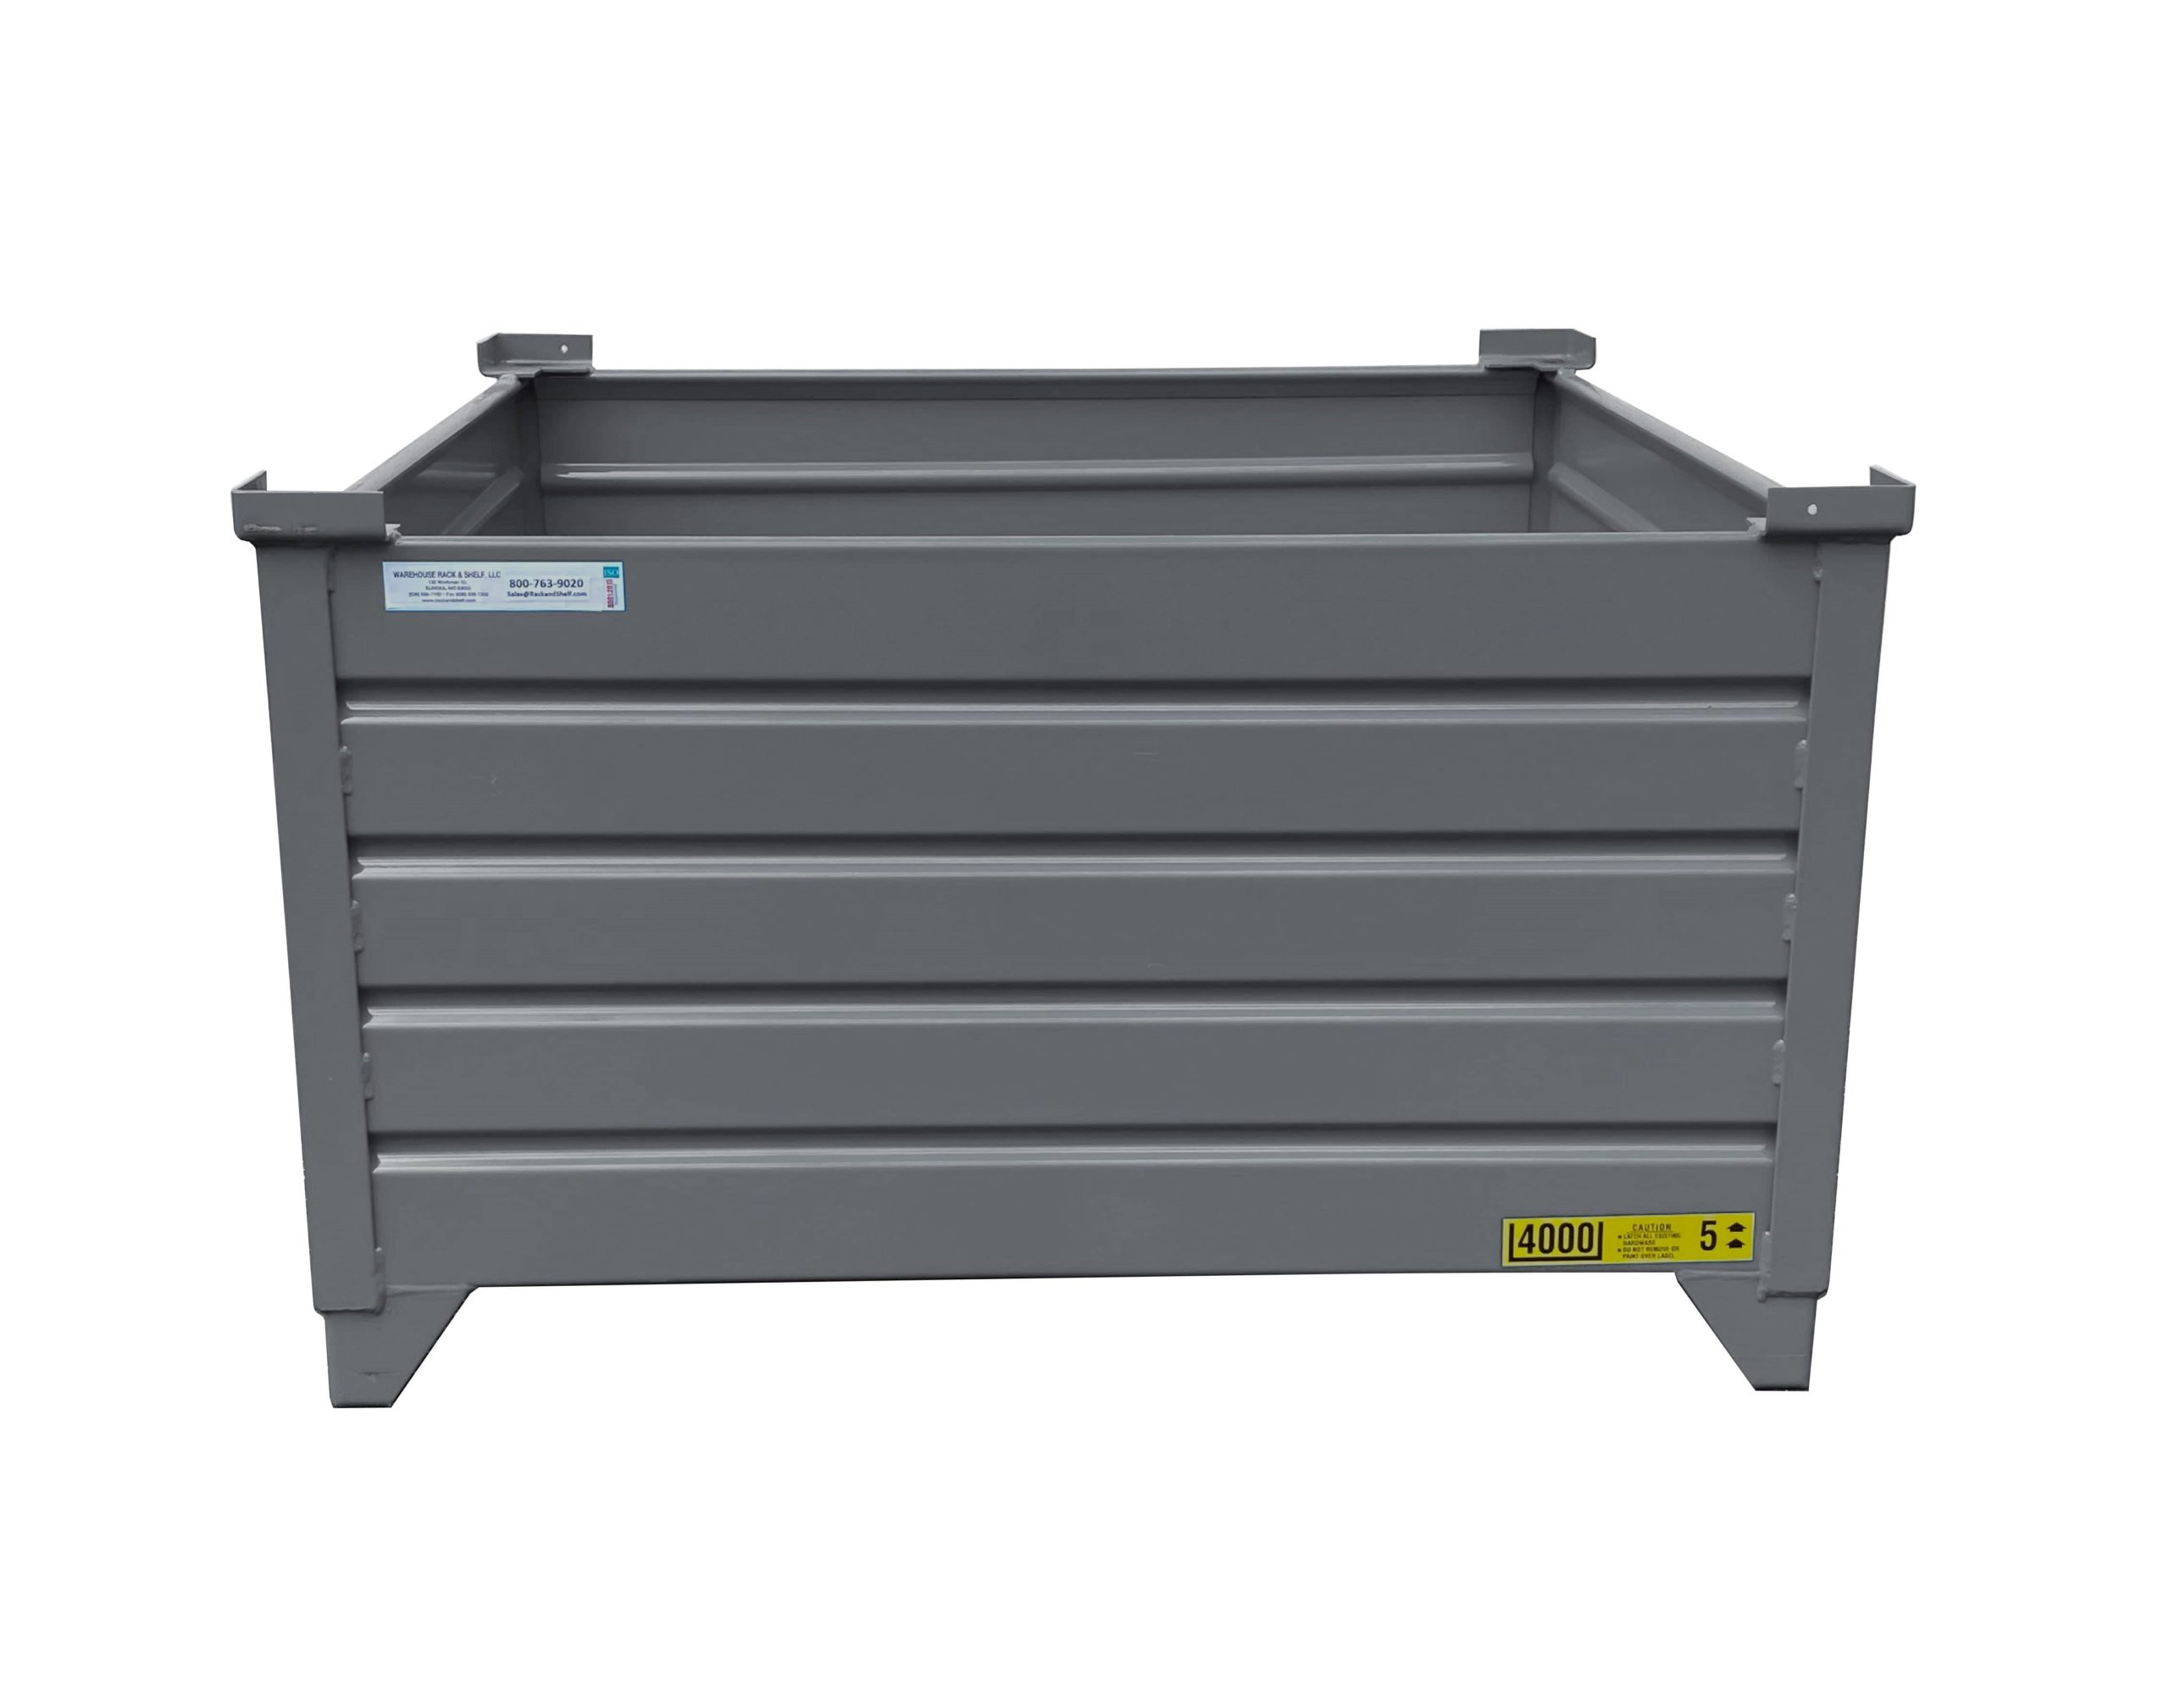 https://rackandshelf.com/wp-content/uploads/2022/08/Topper-Gray-Corrugated-Steel-Container-PN-51009-X-1-scaled.jpg